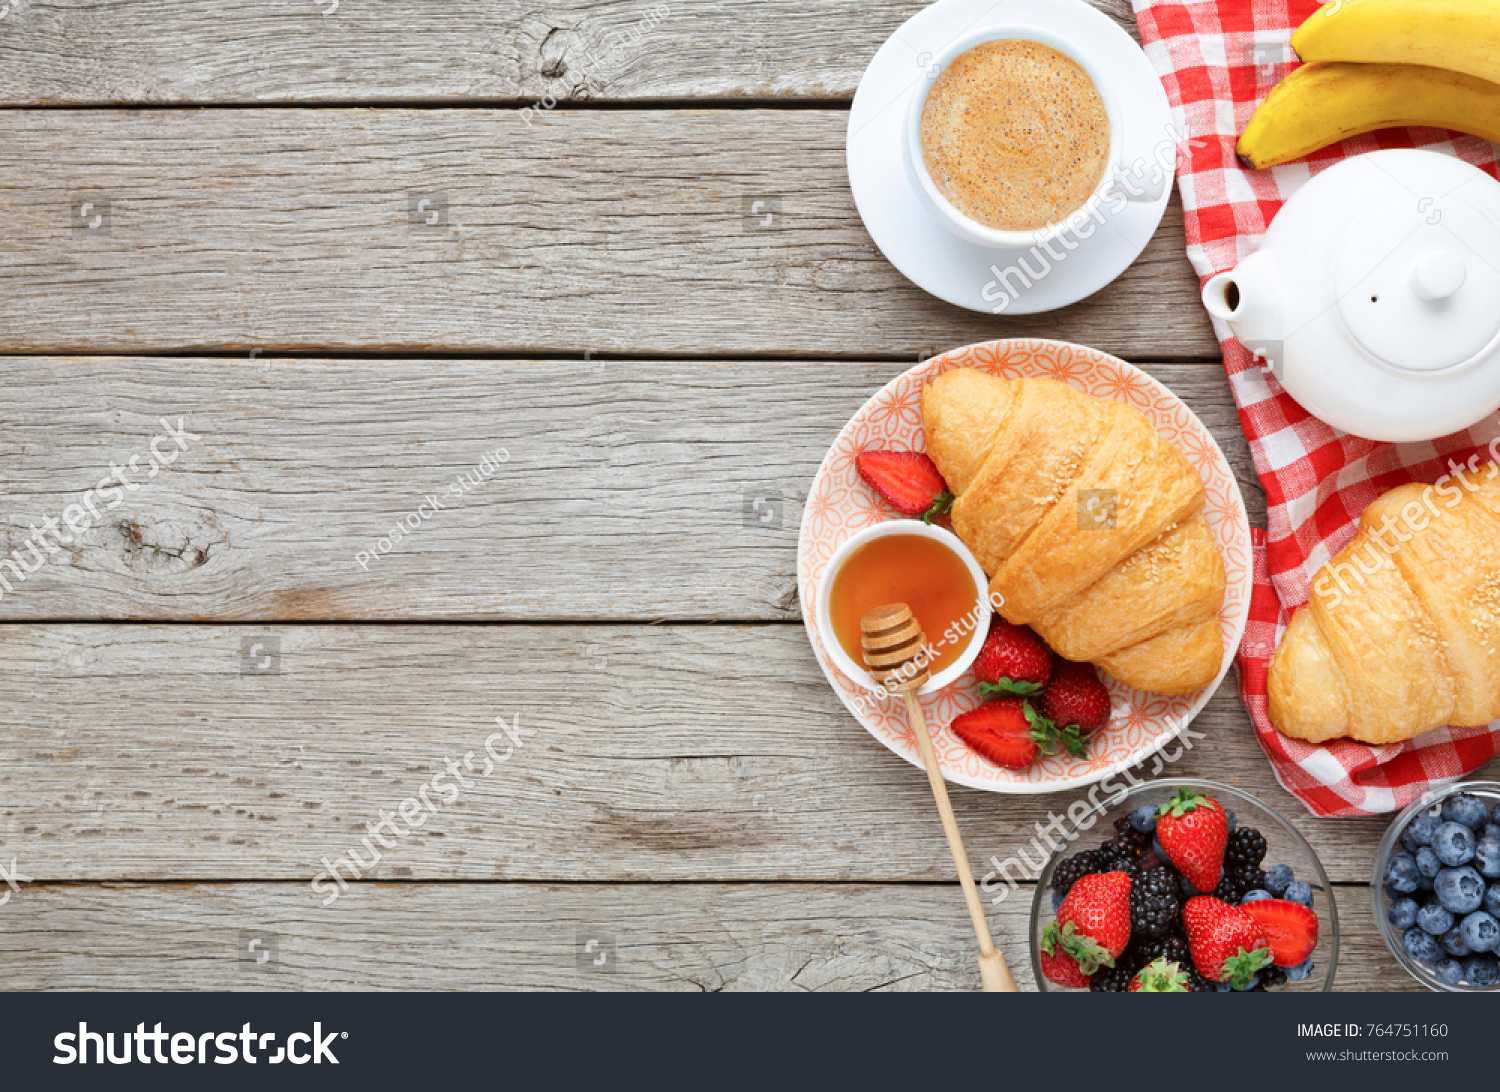 Rich Tasty Breakfast Background Croissants With Golden Crust Muesli Honey Coffee Cup And